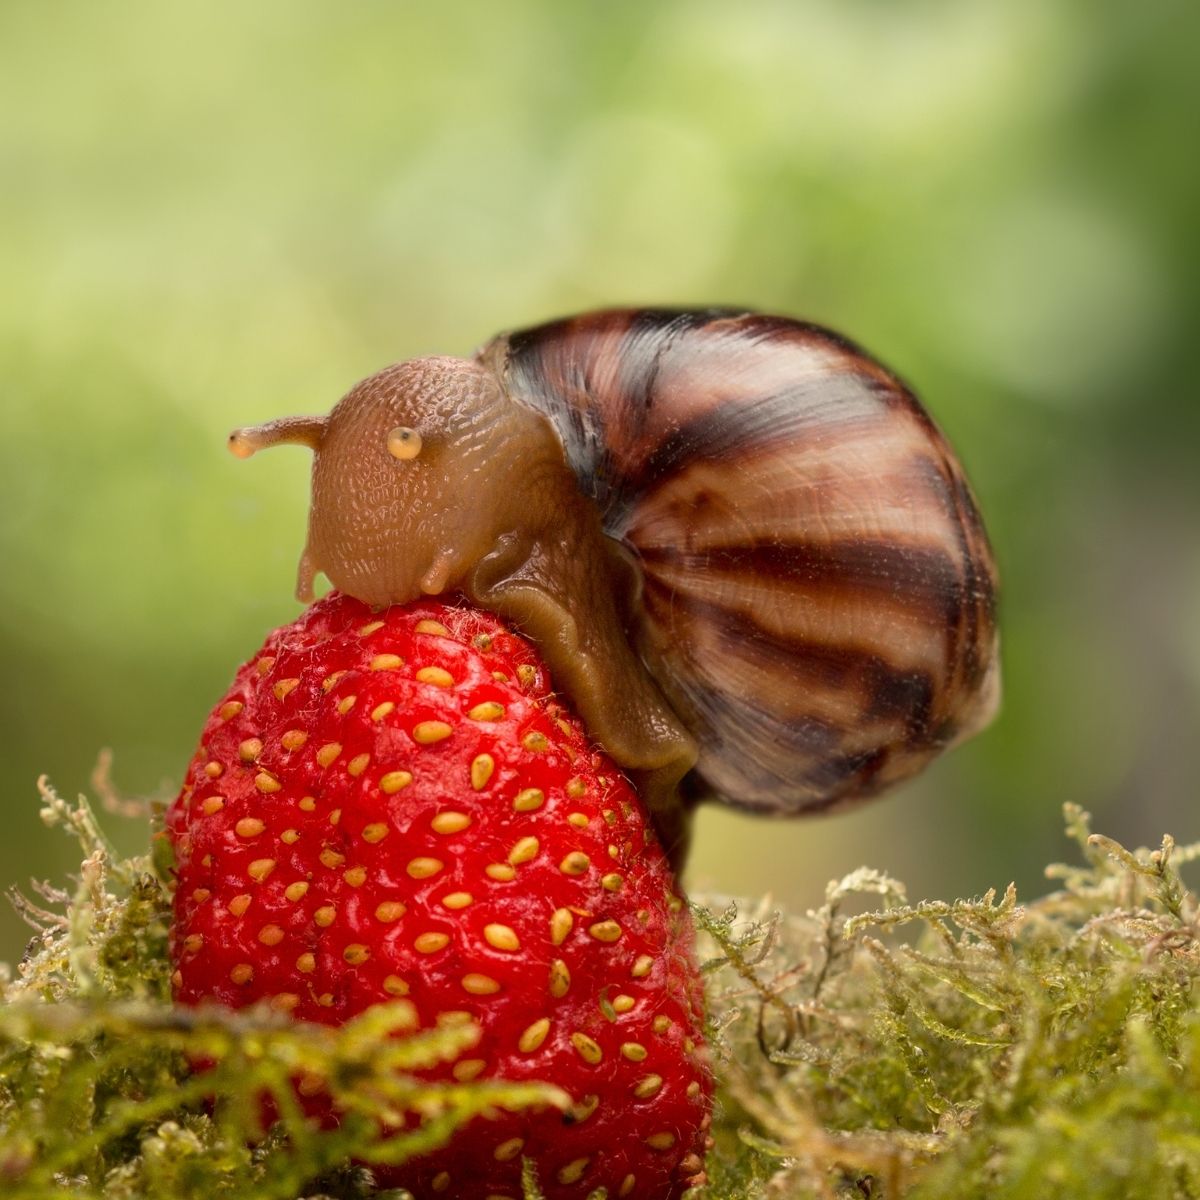 snail eating a strawberry